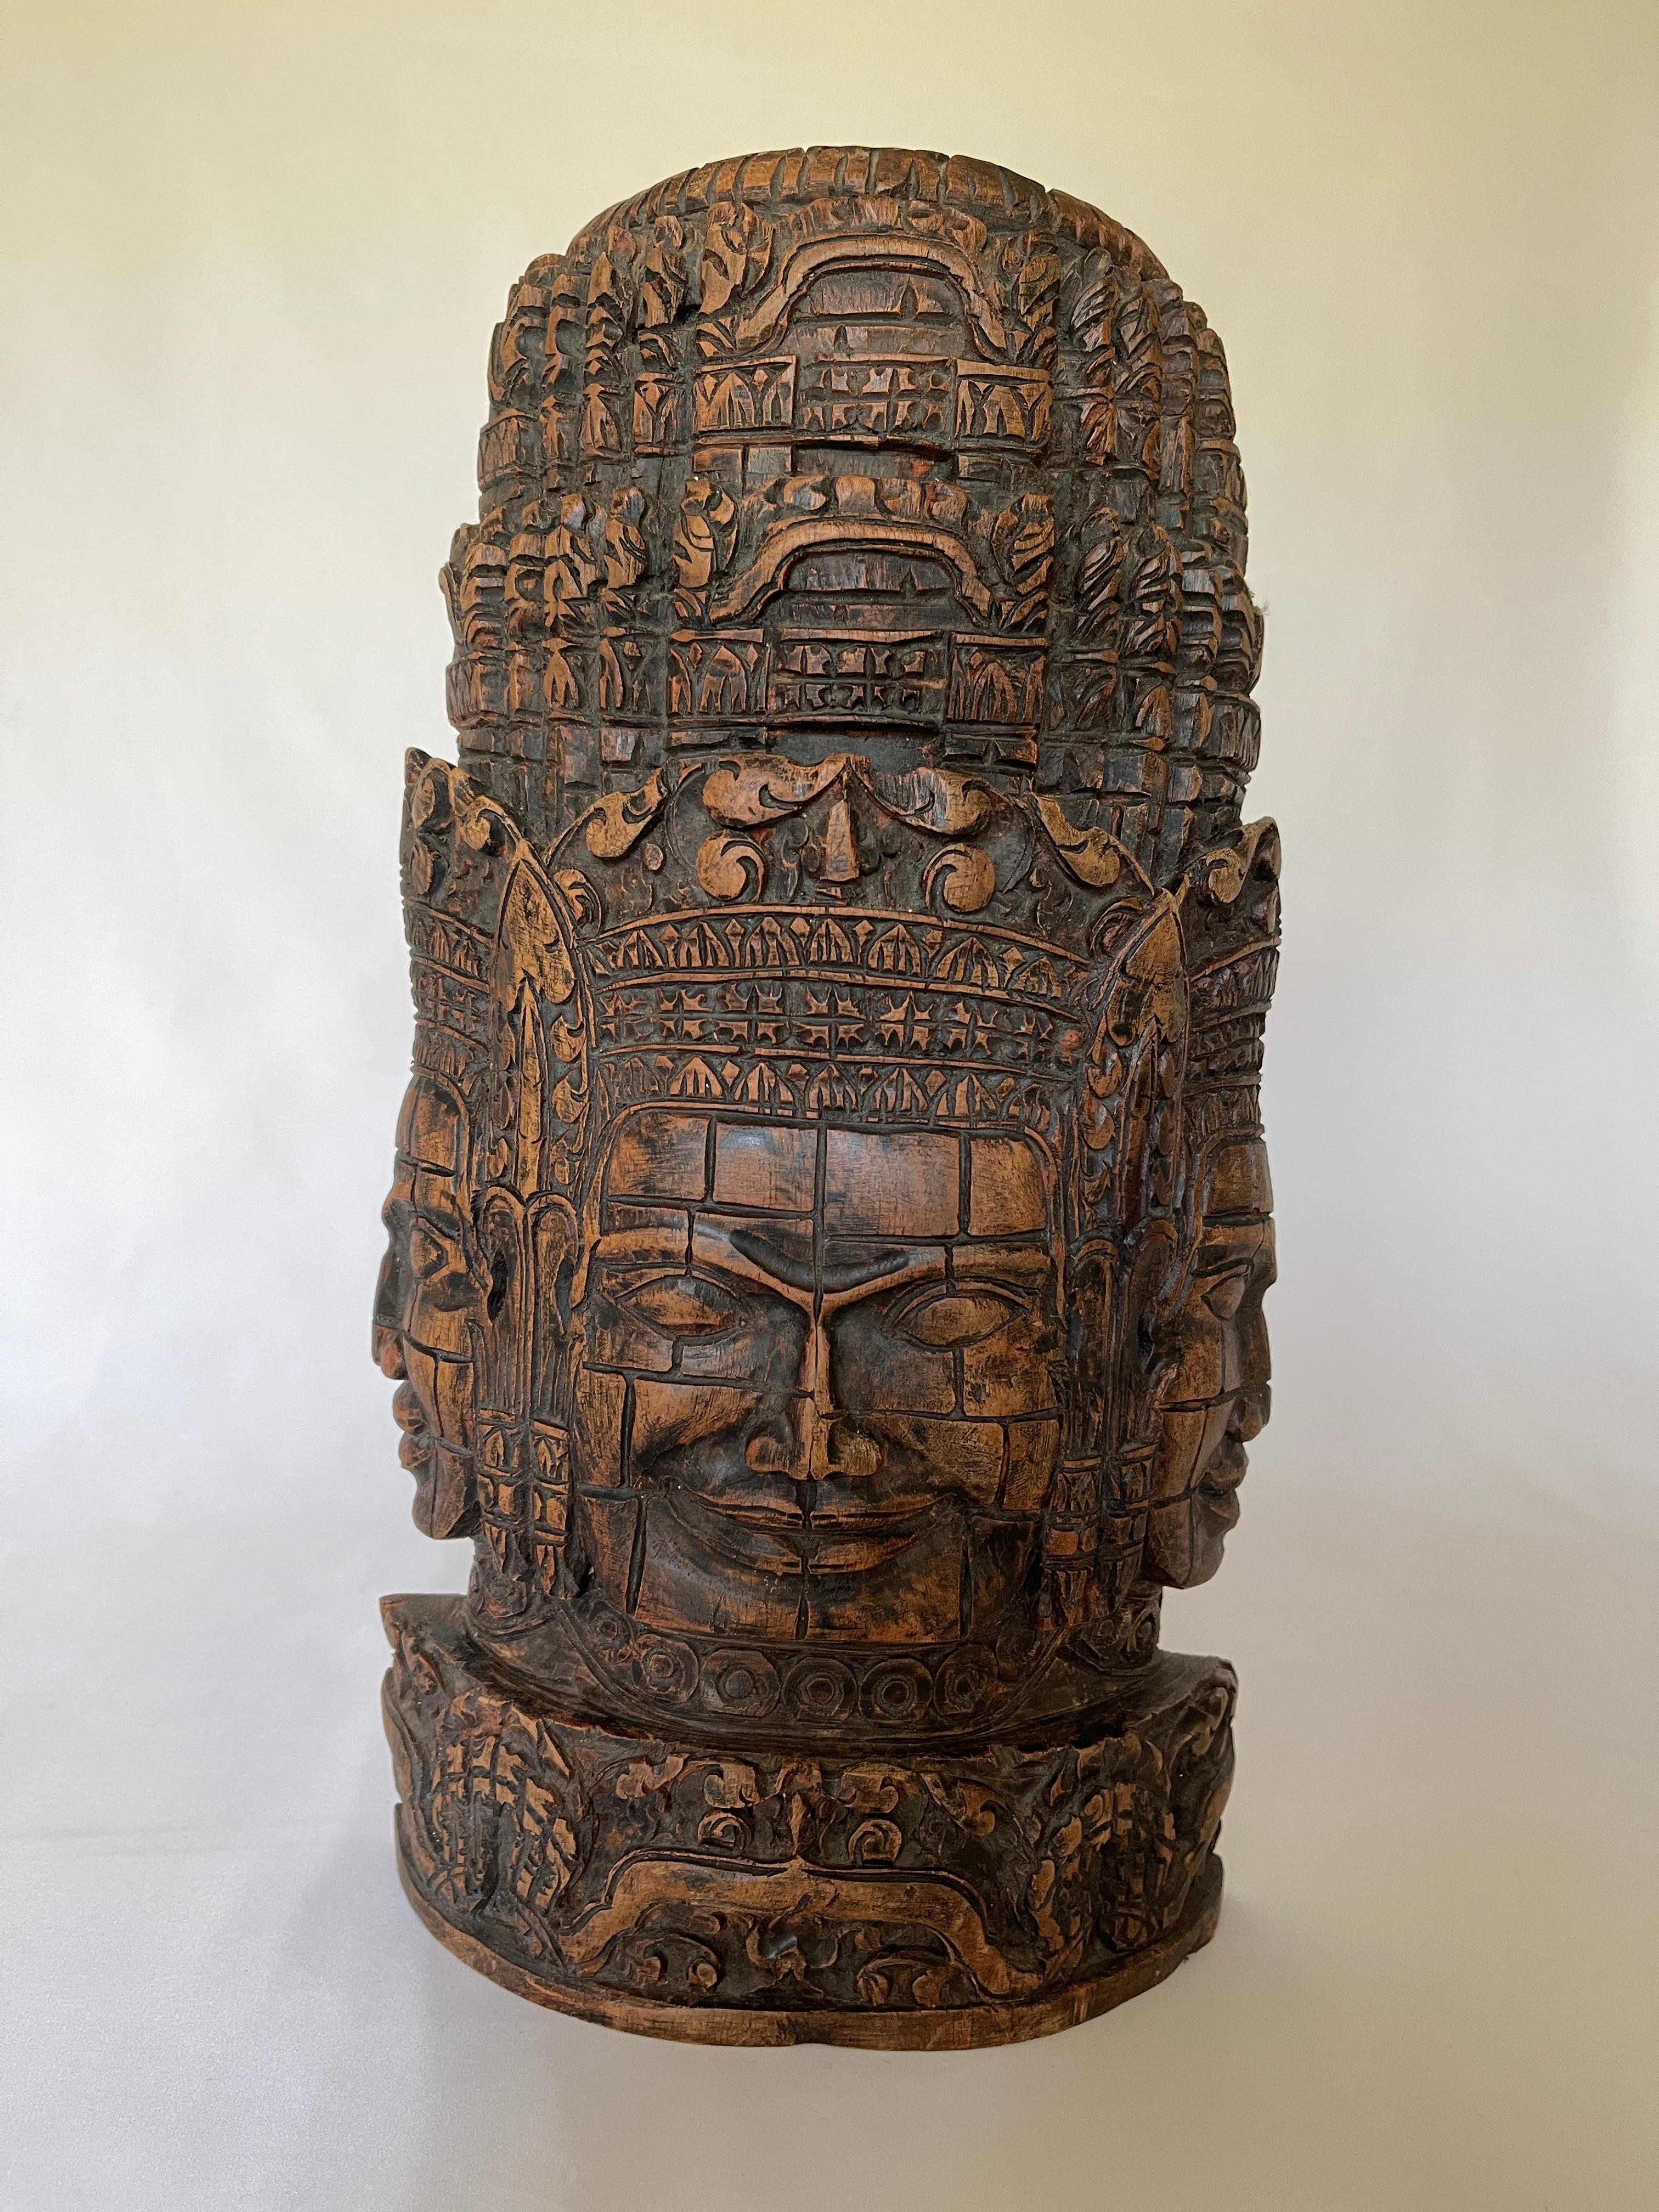 Vintage Indian hardwood Shiva Trimurti sculpture is intricately hand carved with three sides of the face of Lord Shiva, one of the 3 major Gods of the Hindu culture. He wears an elaborate headdress, and smiles benevolently.
 